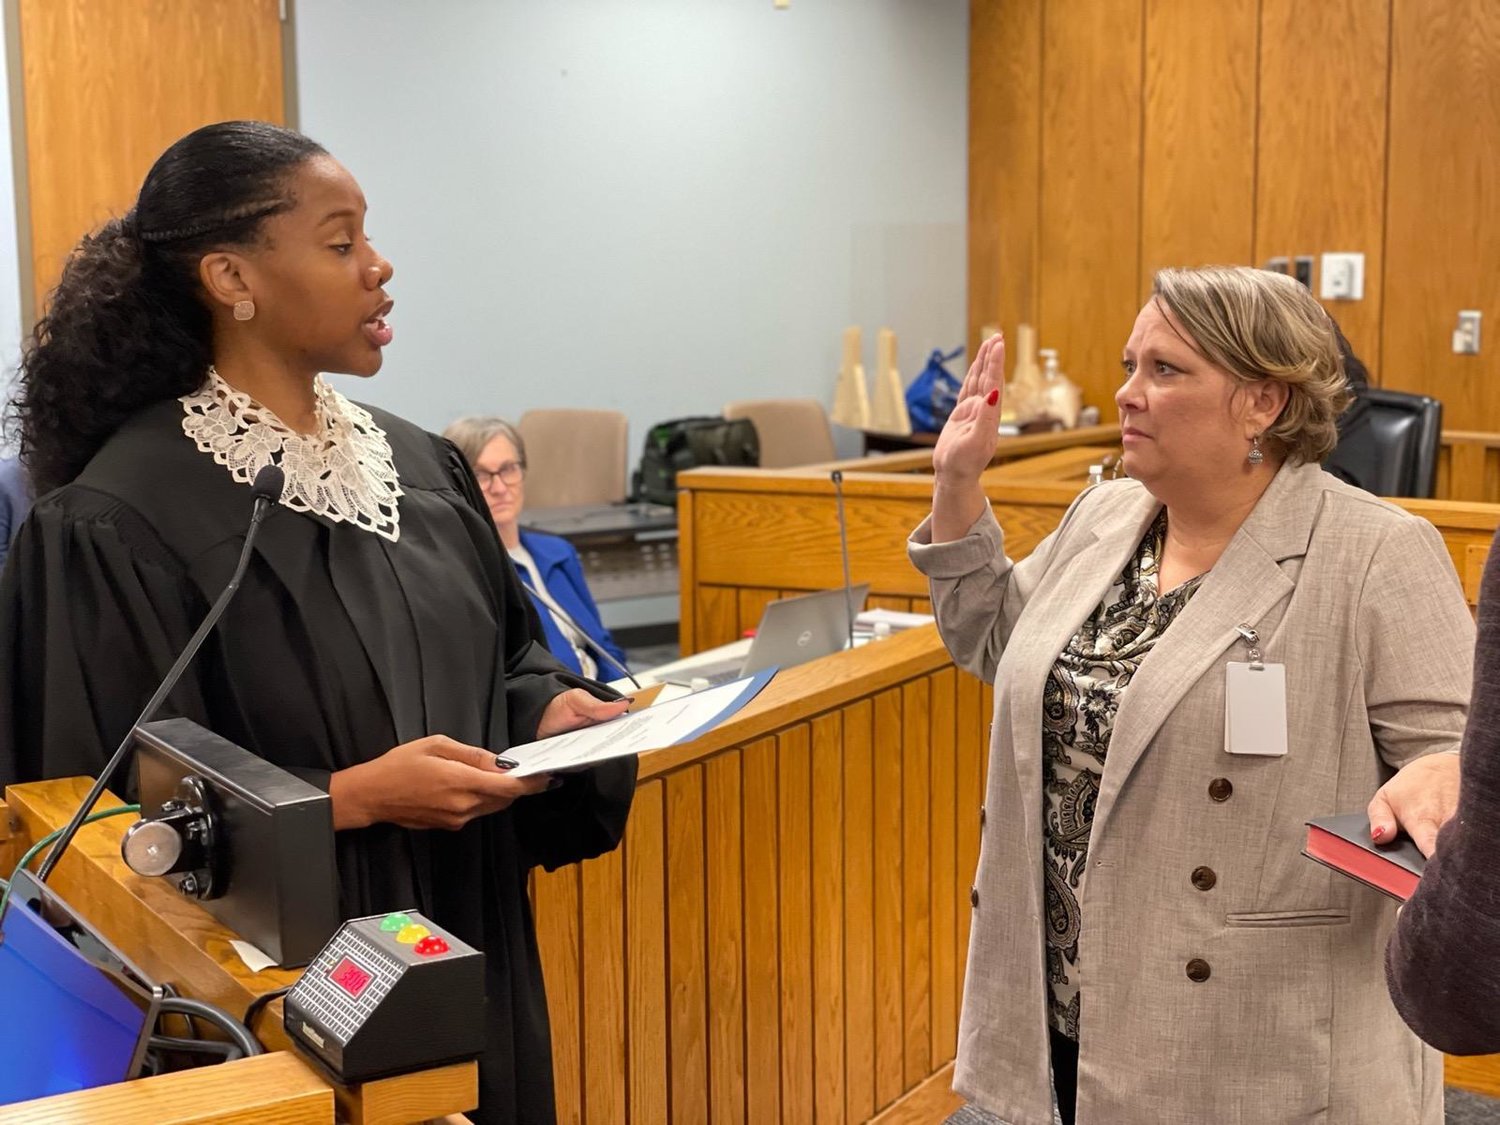 District Court Judge Tiffany Whitfield administers the oath of office to Cumberland County Clerk to the Board Andrea Tebbe. The Board of Commissioners appointed Tebbe, who previously served as deputy clerk to the board, as clerk effective Dec. 1 following the retirement of former Clerk Candice White.